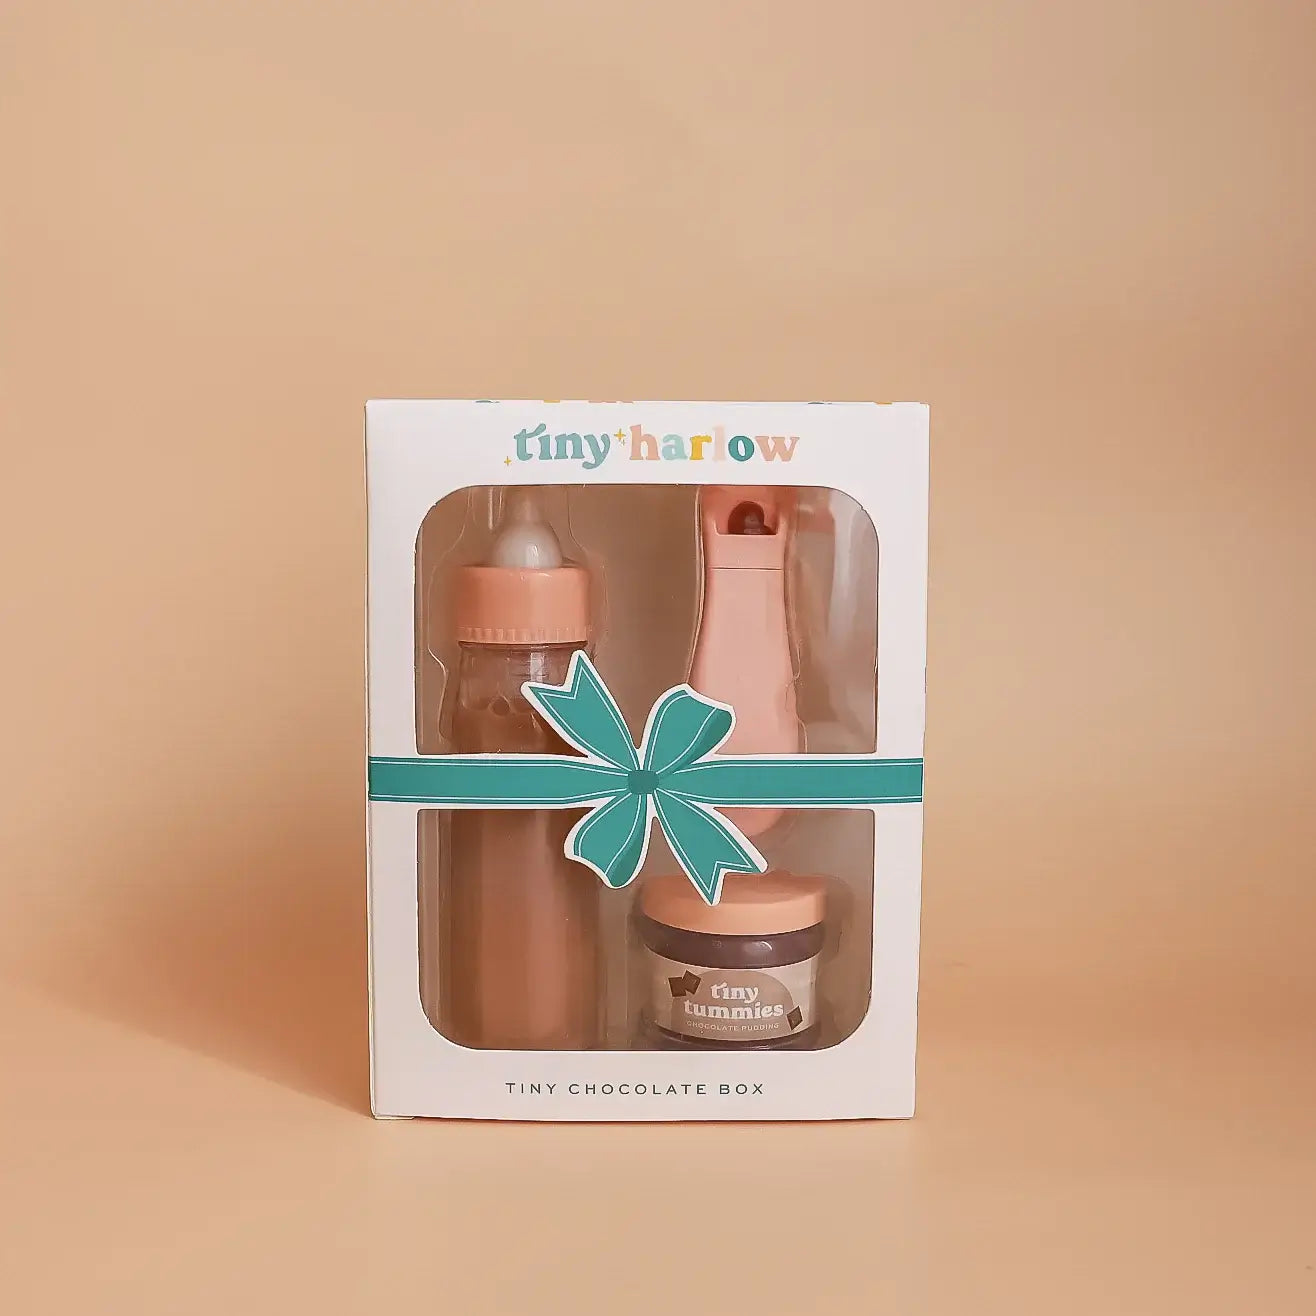 Tiny Chocolate Box Set with chocolate milk bottle and chocolate pudding food for dolls by Tiny Harlow